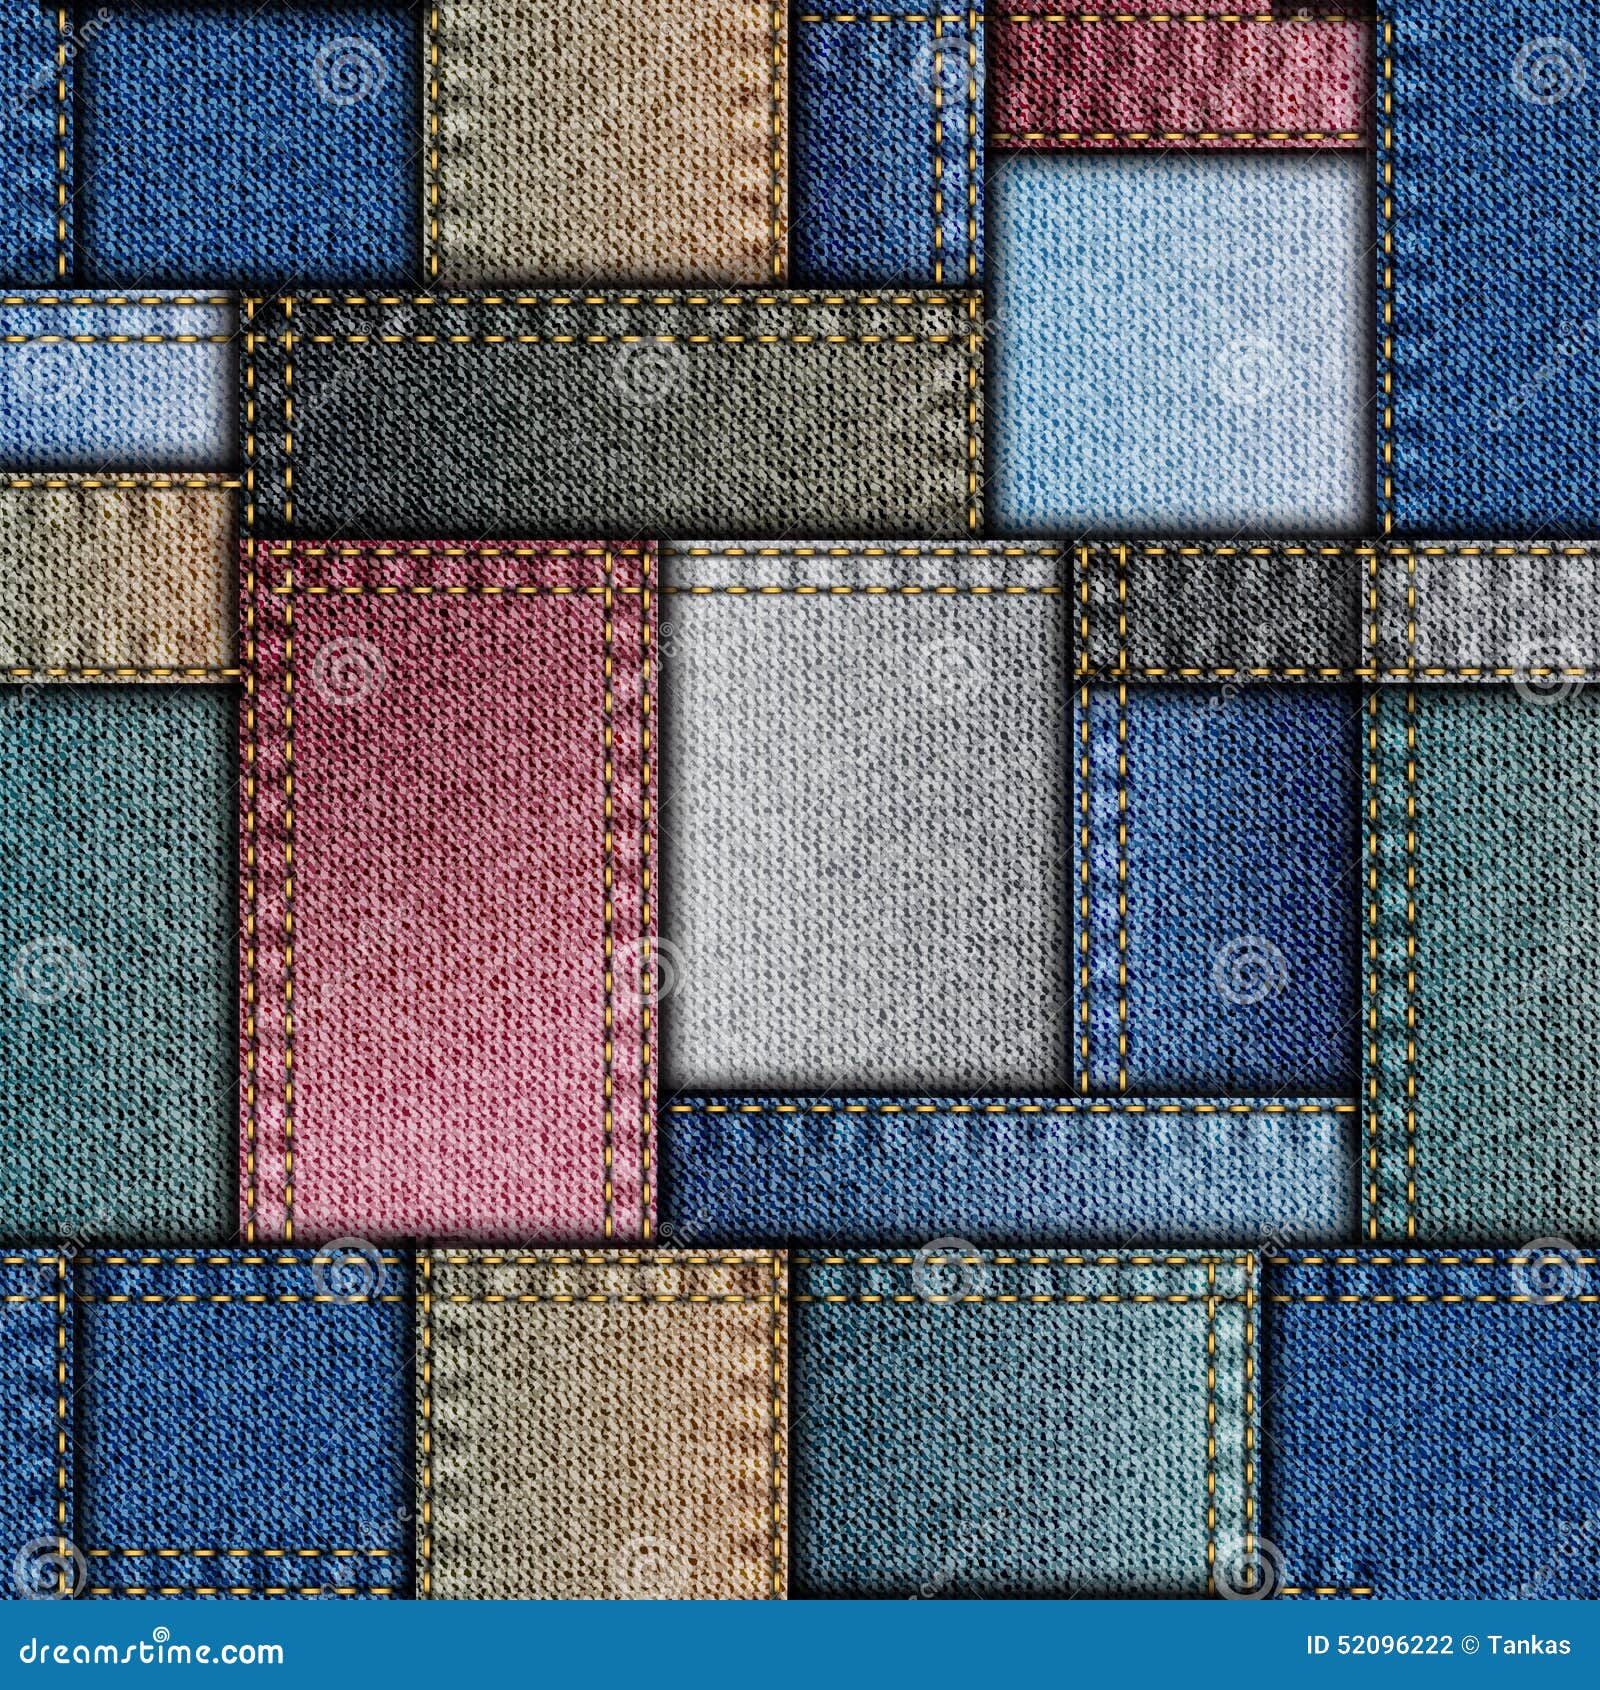 Patchwork of denim fabric stock vector. Illustration of jeans - 52096222